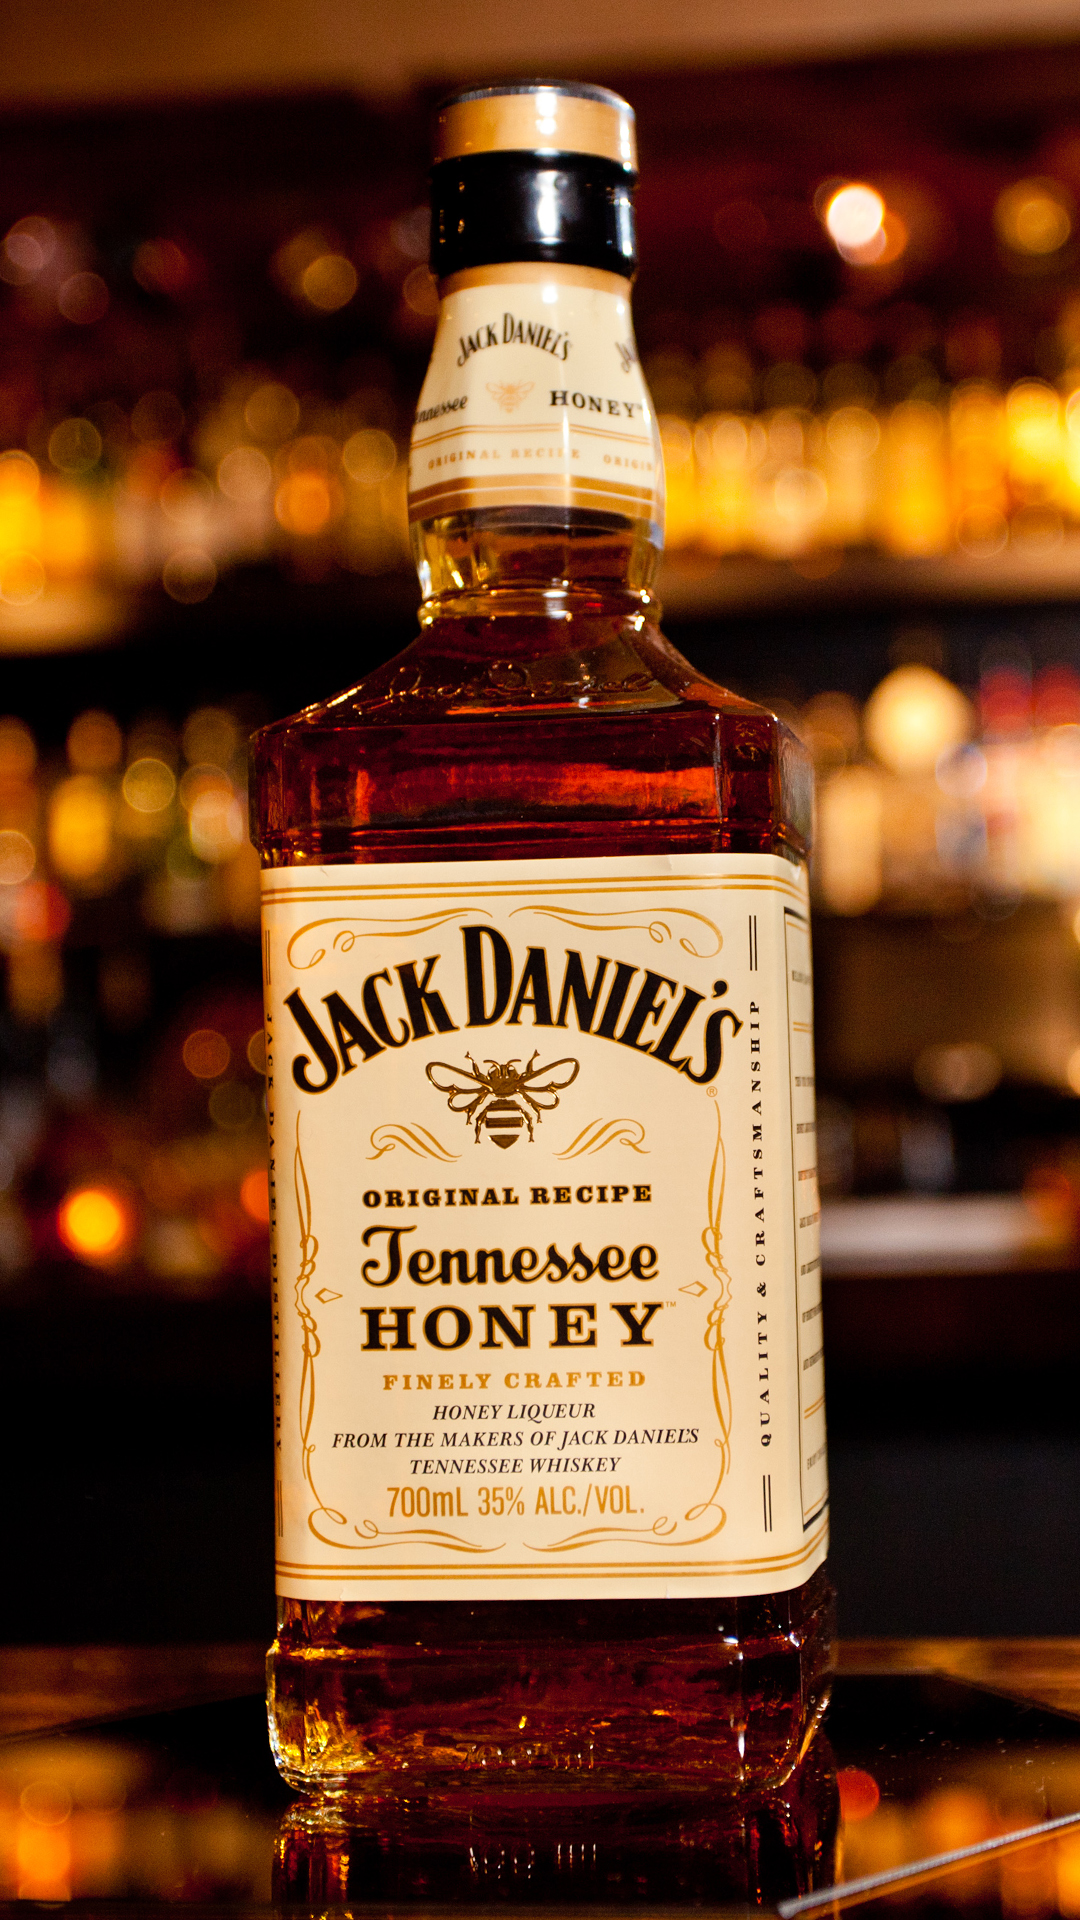 Jack Daniels htc one wallpaper, free and easy to